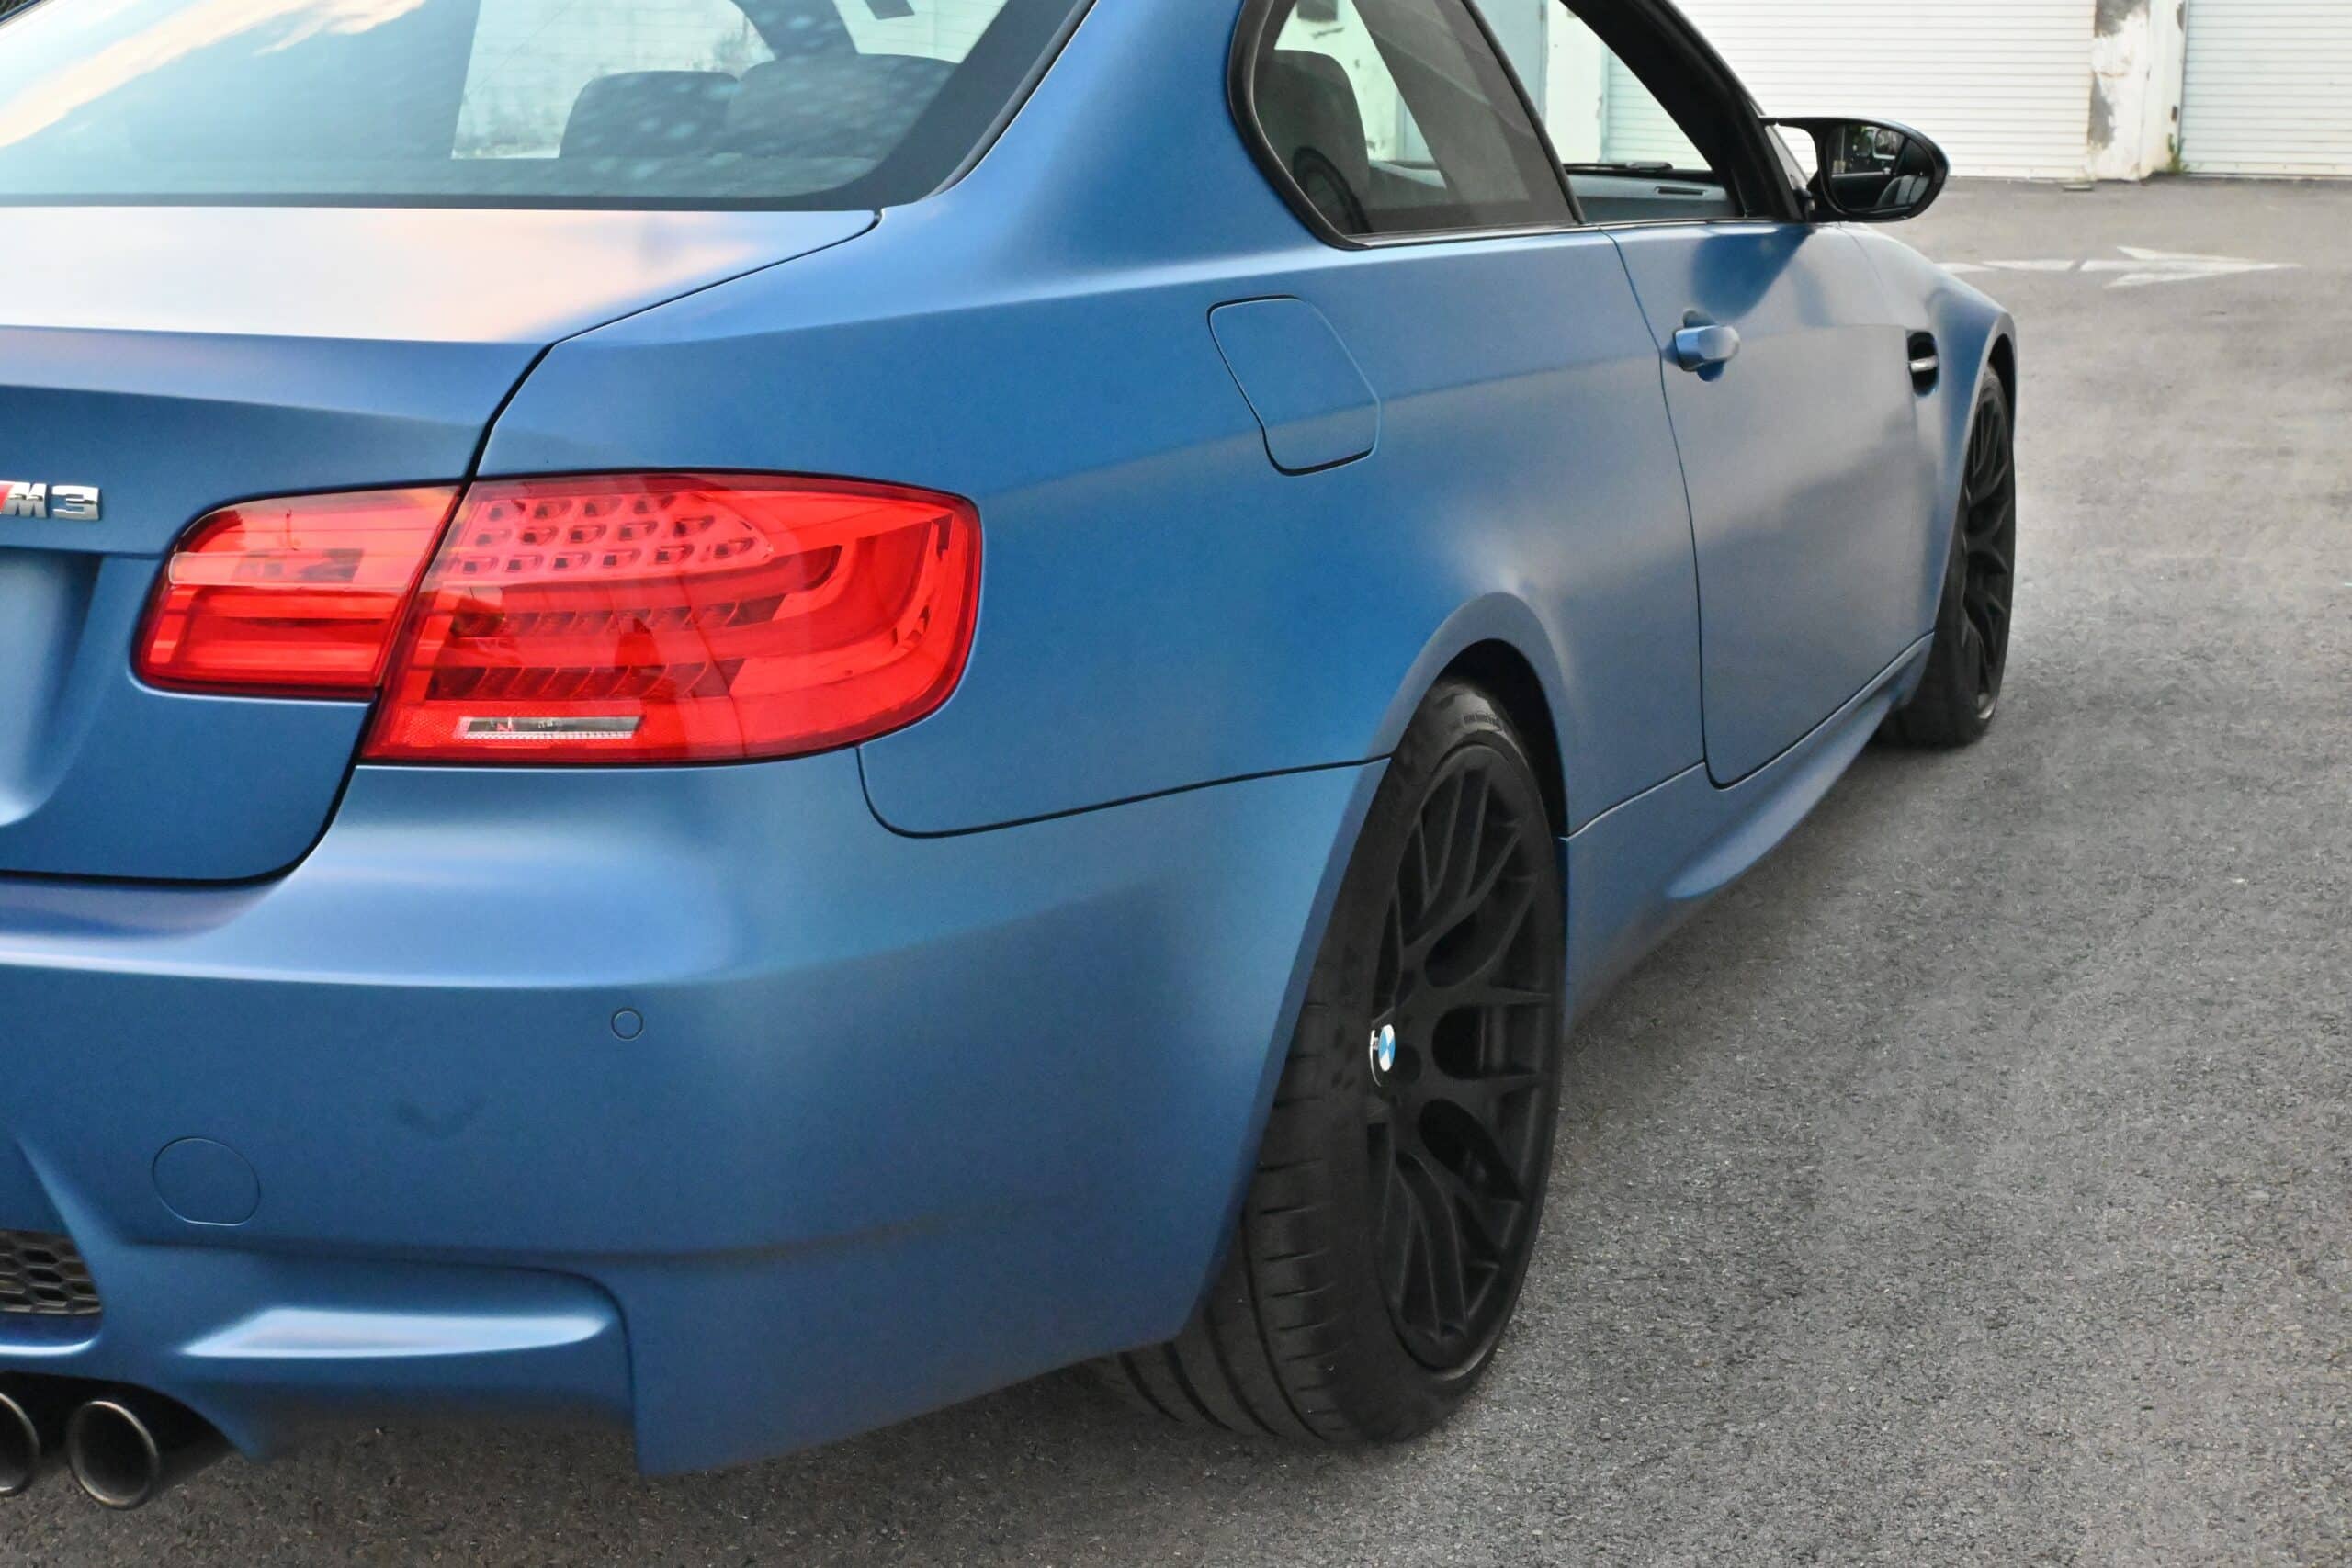 2013 BMW M3 E92 Frozen Edition Competition All Original- Only 15K Miles-1 of 72 Cars-Original Window Sticker-Mint Condition